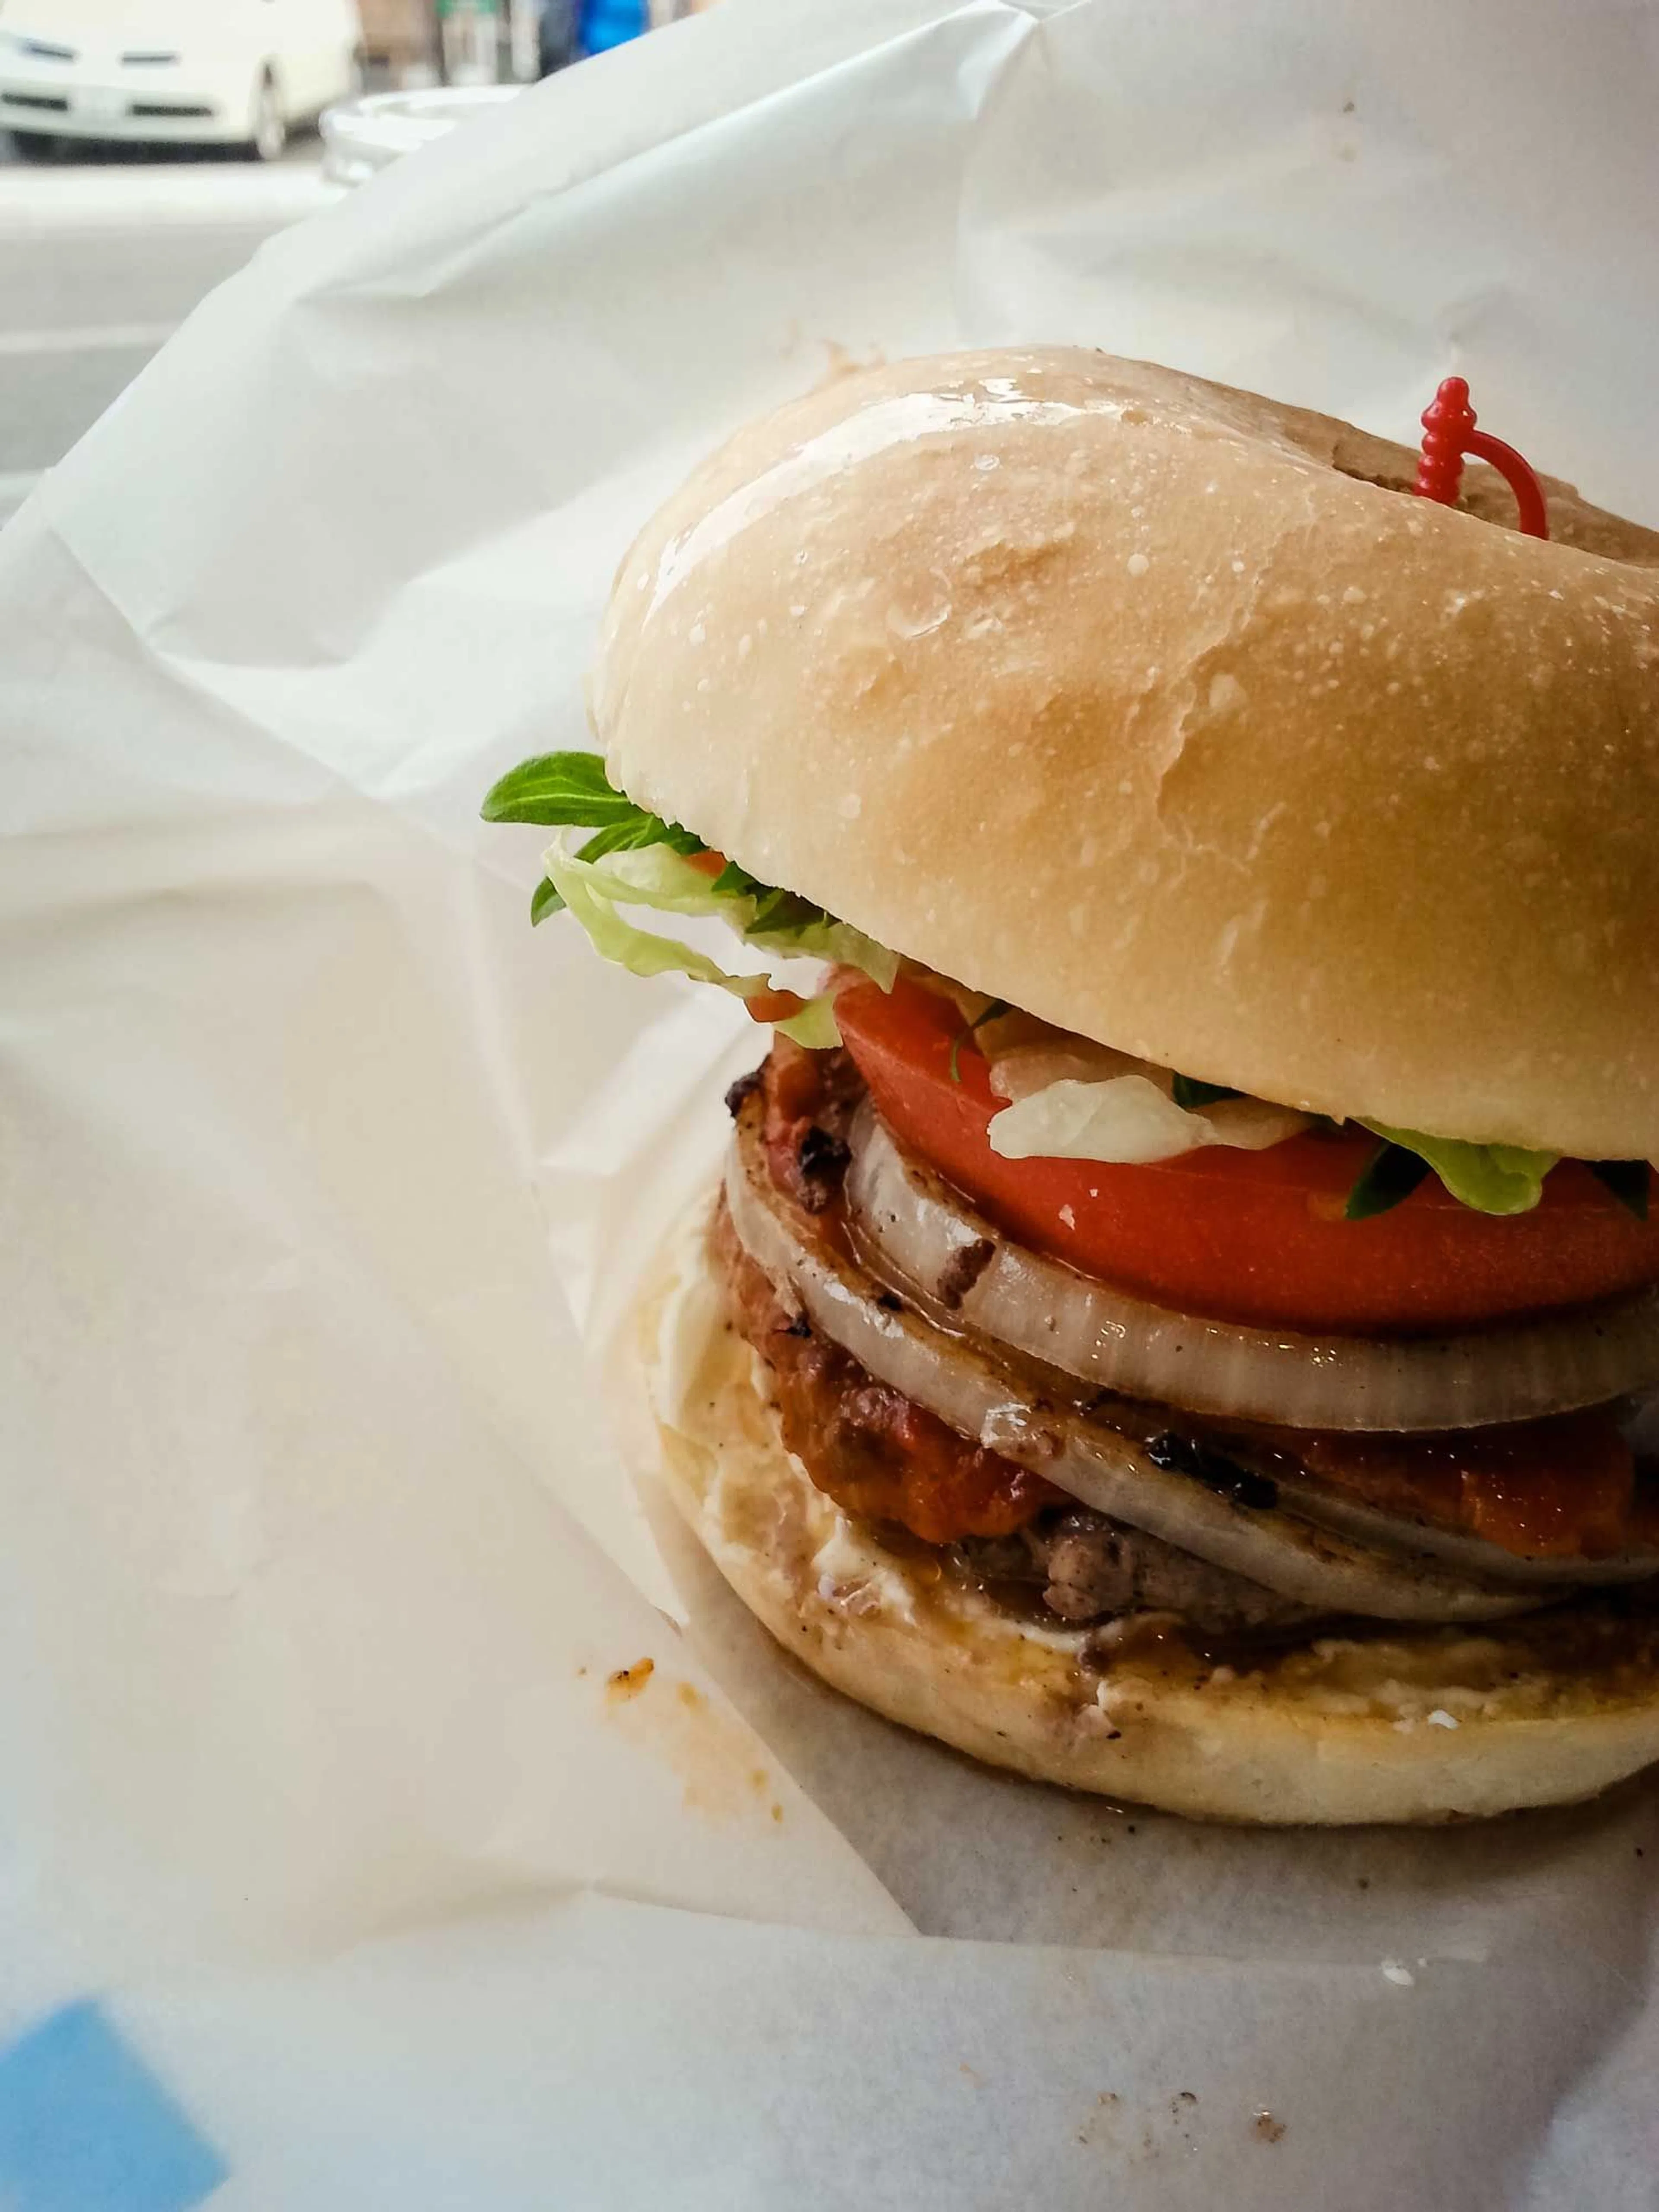 The eponymous Yufuin burger is available in ... Yufuin.